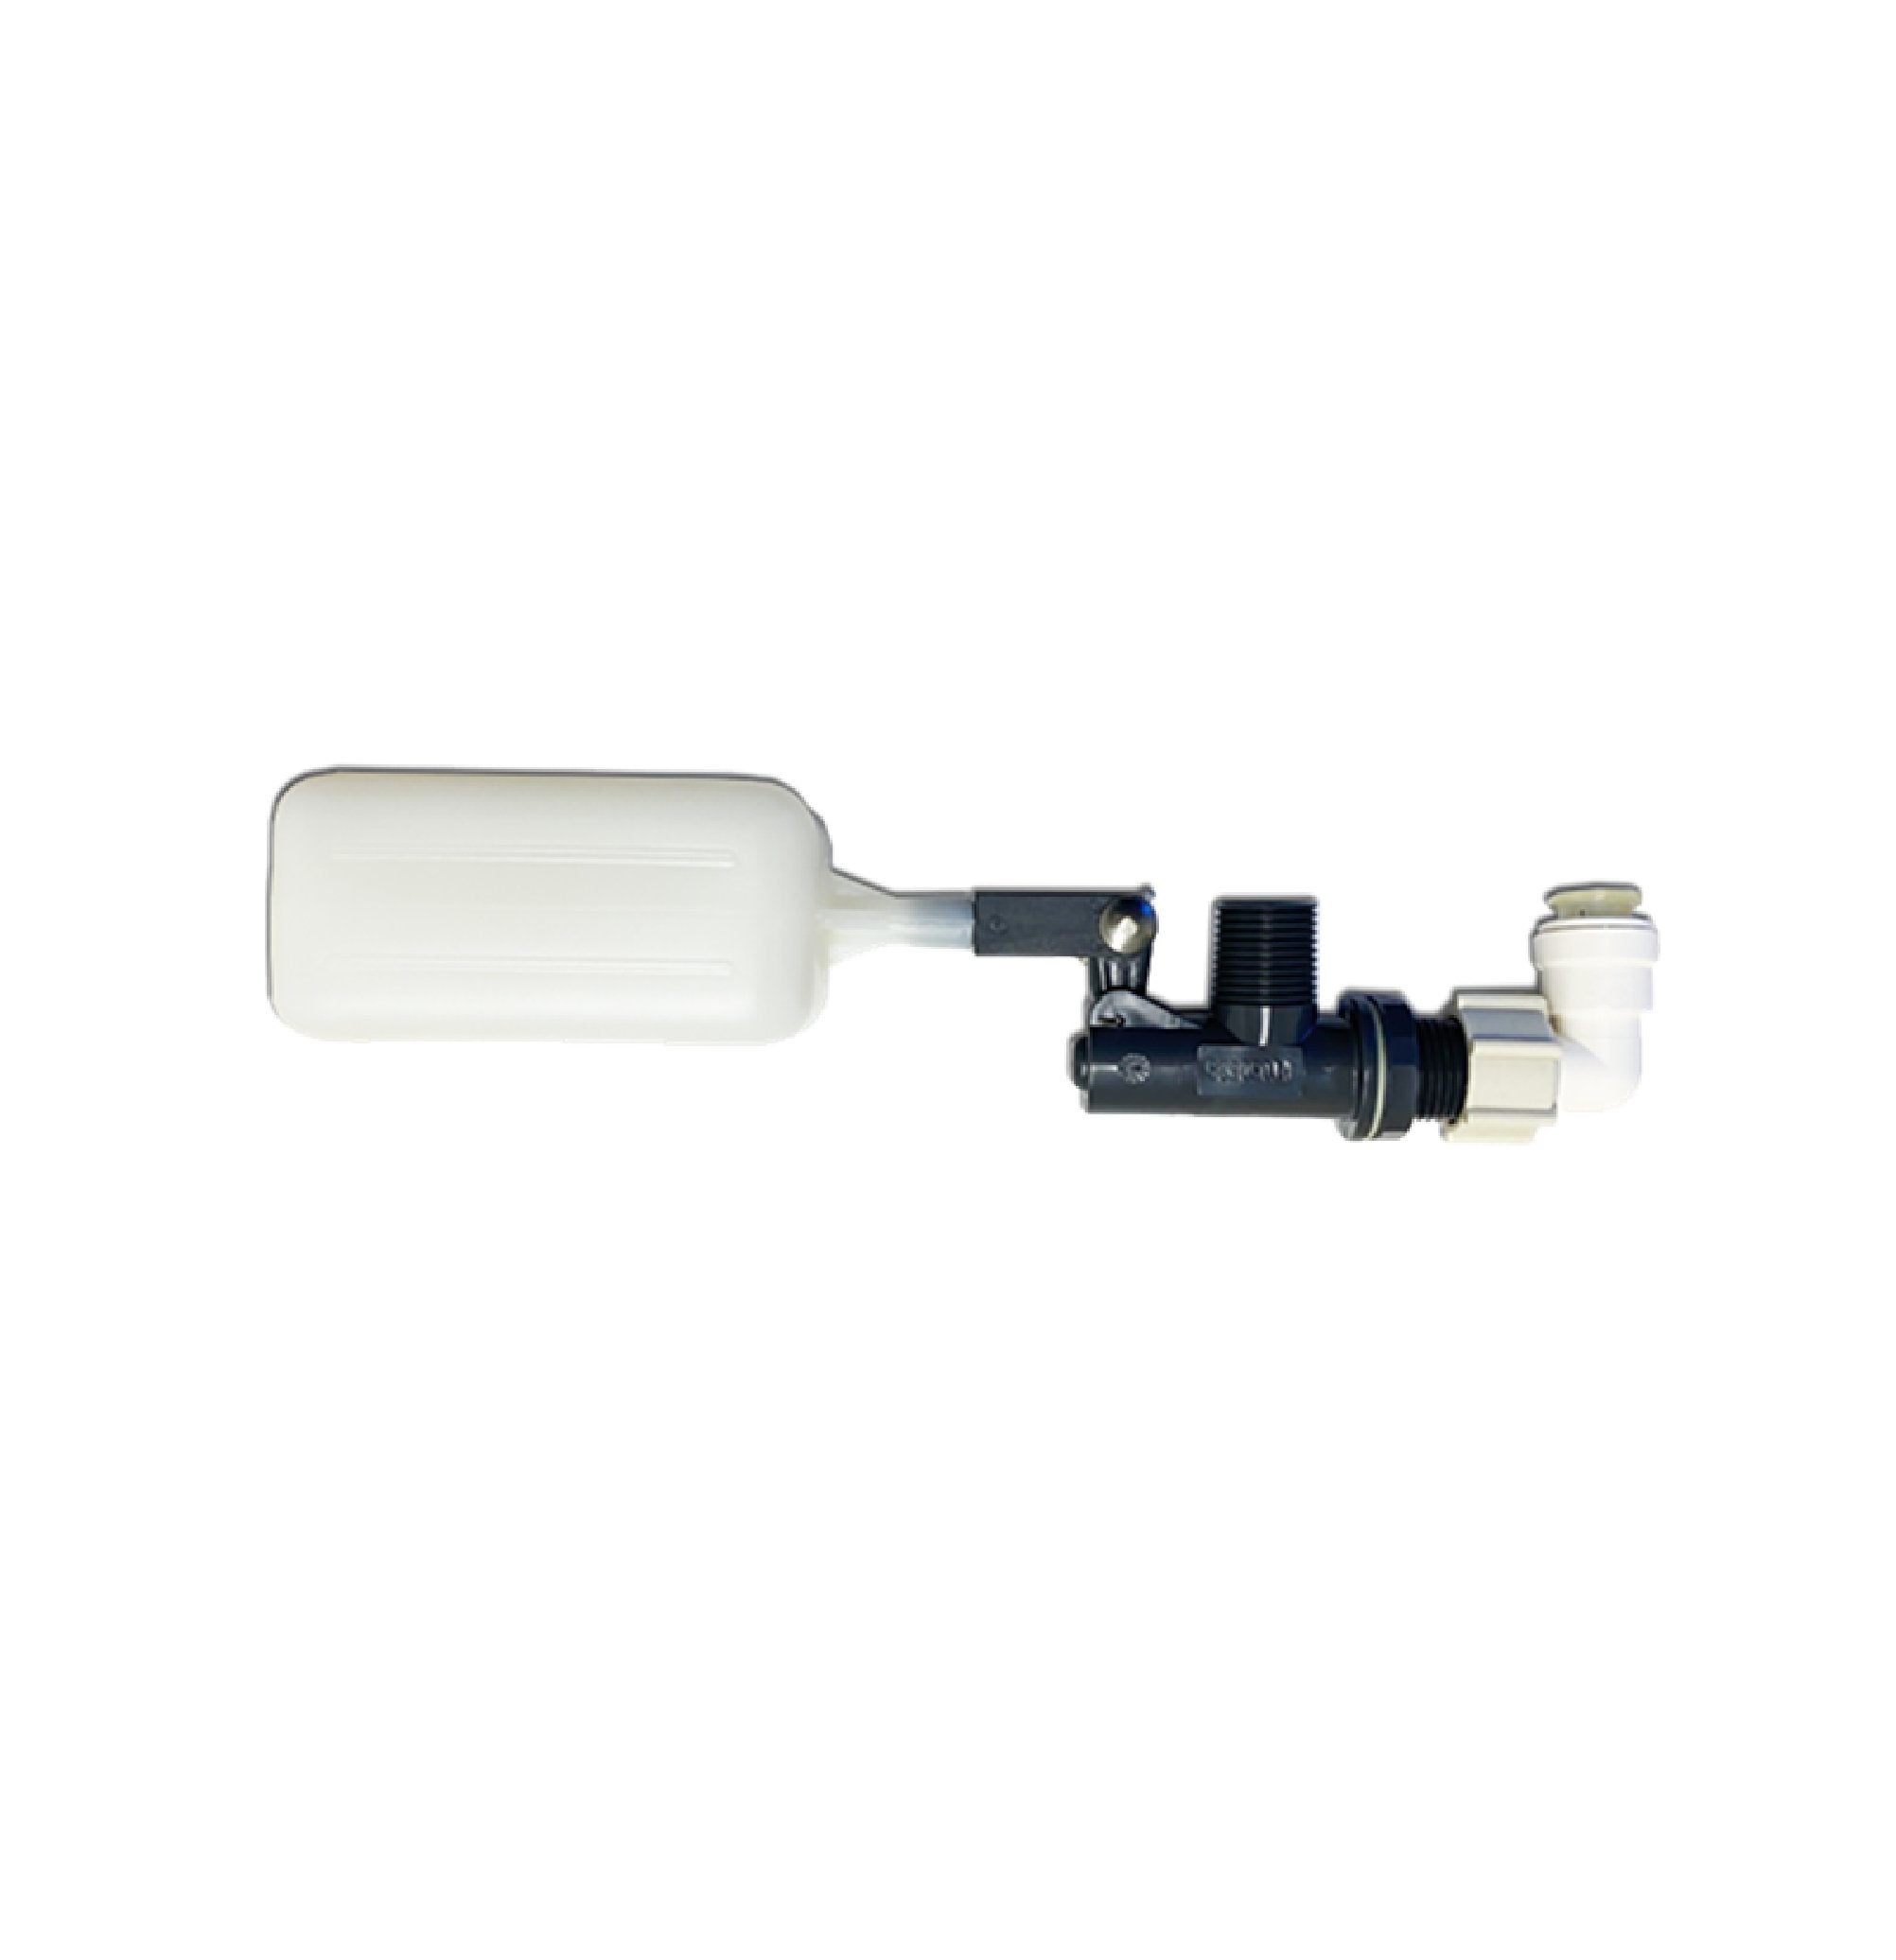 Current Culture H2O Fast Fill Float Valve Kit With Reservoir Adapter Kit - Green Thumb Depot